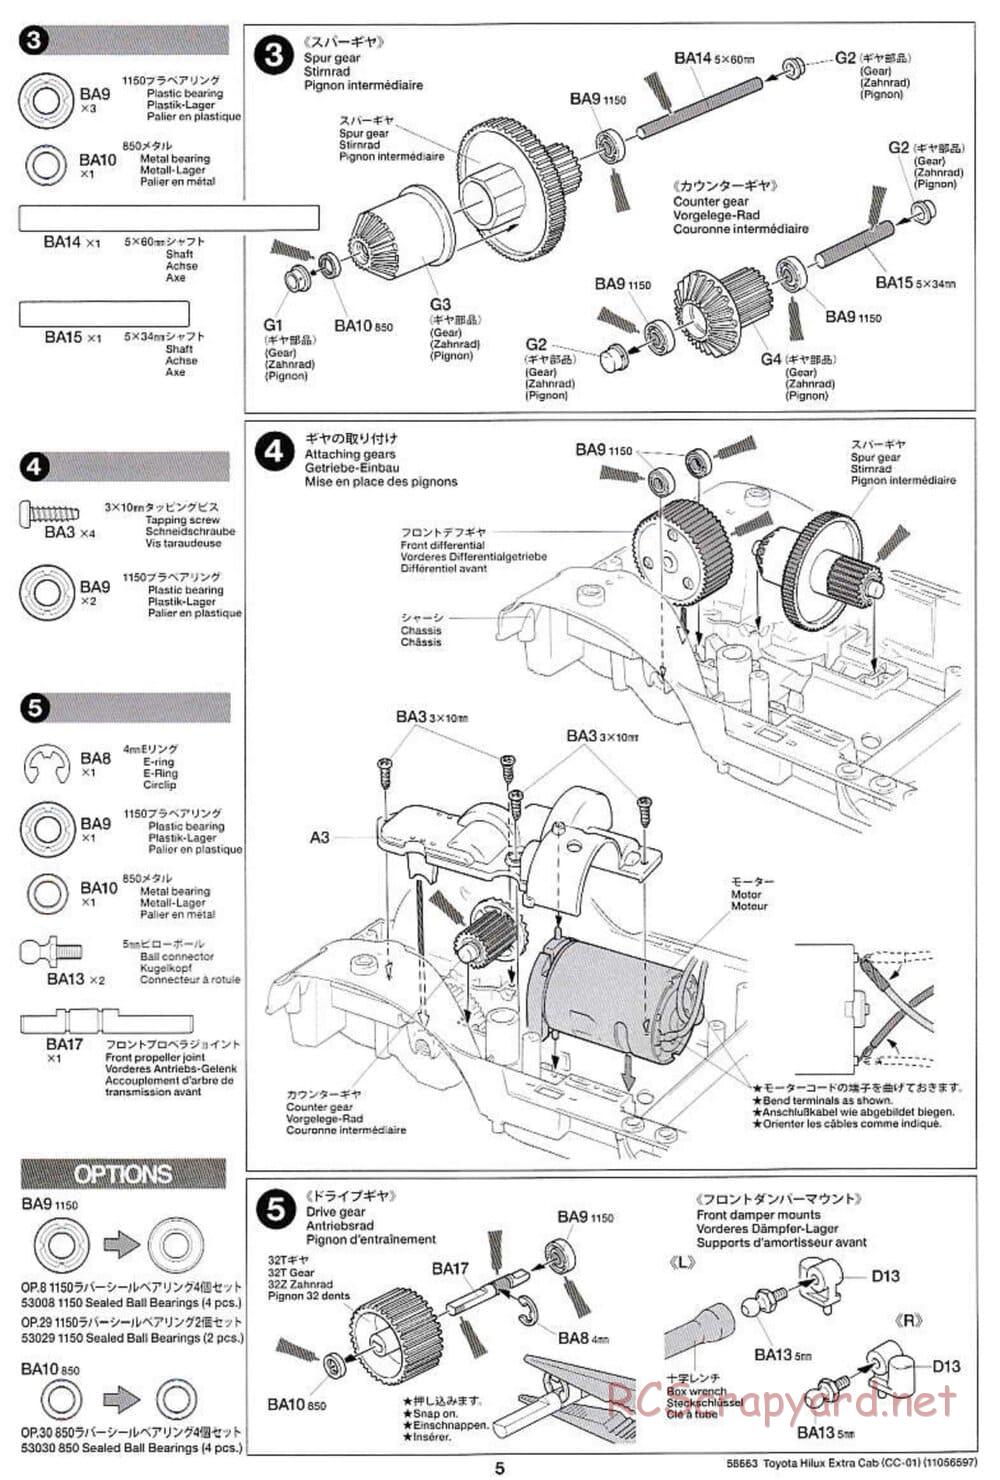 Tamiya - Toyota Hilux Extra Cab - CC-01 Chassis - Manual - Page 5